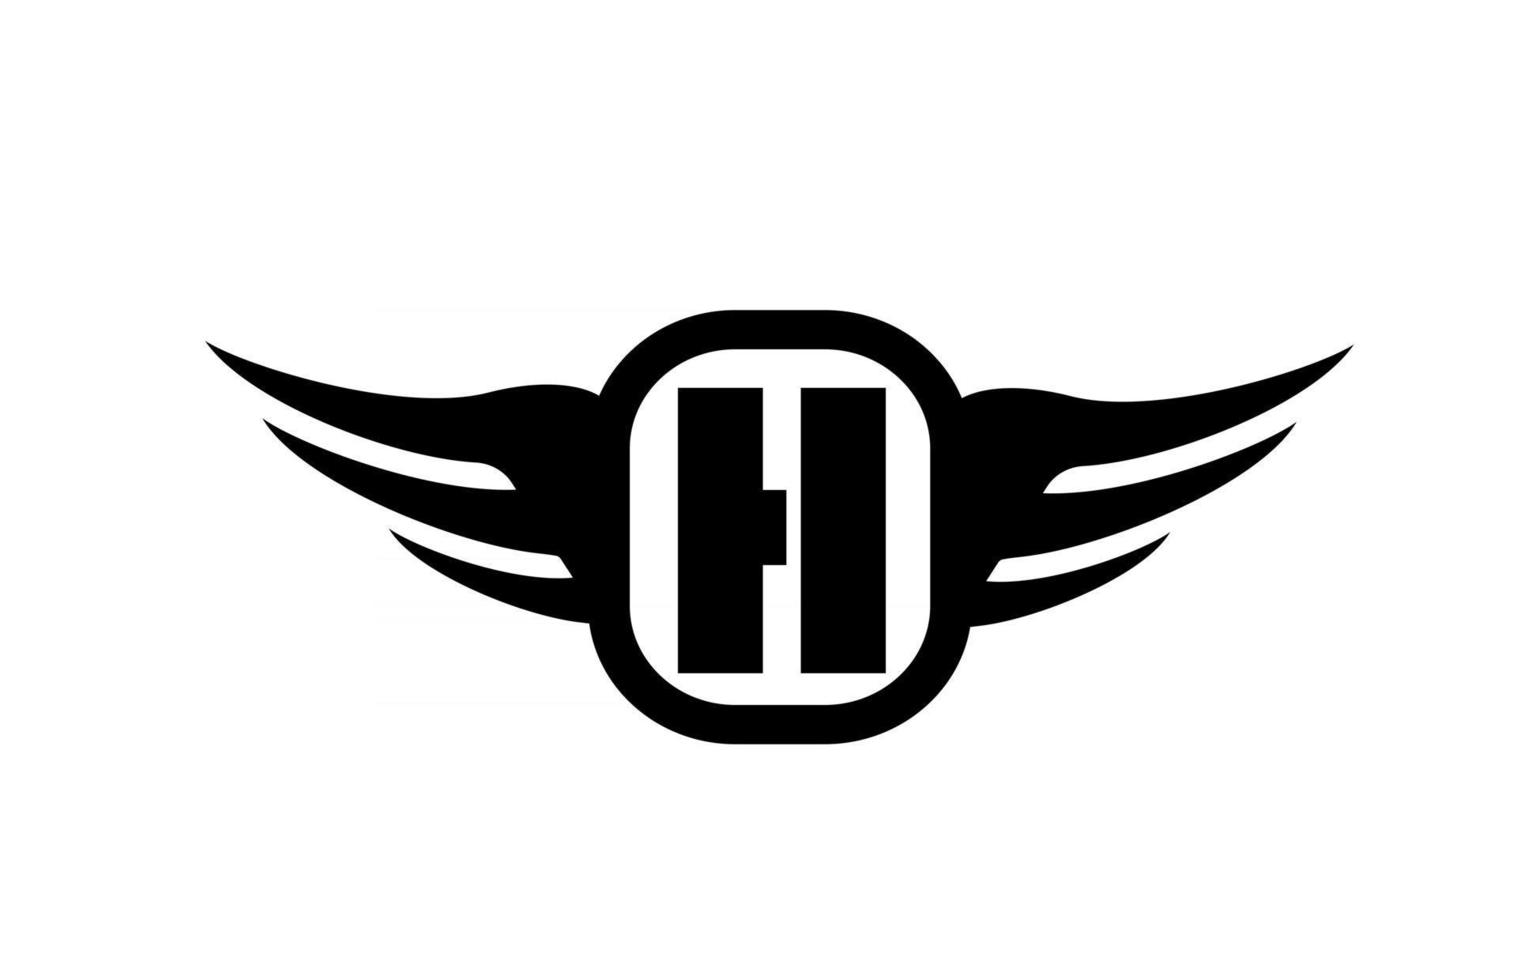 H alphabet letter logo for business and company with wings and black and white color. Corporate brading and lettering icon with simple design vector